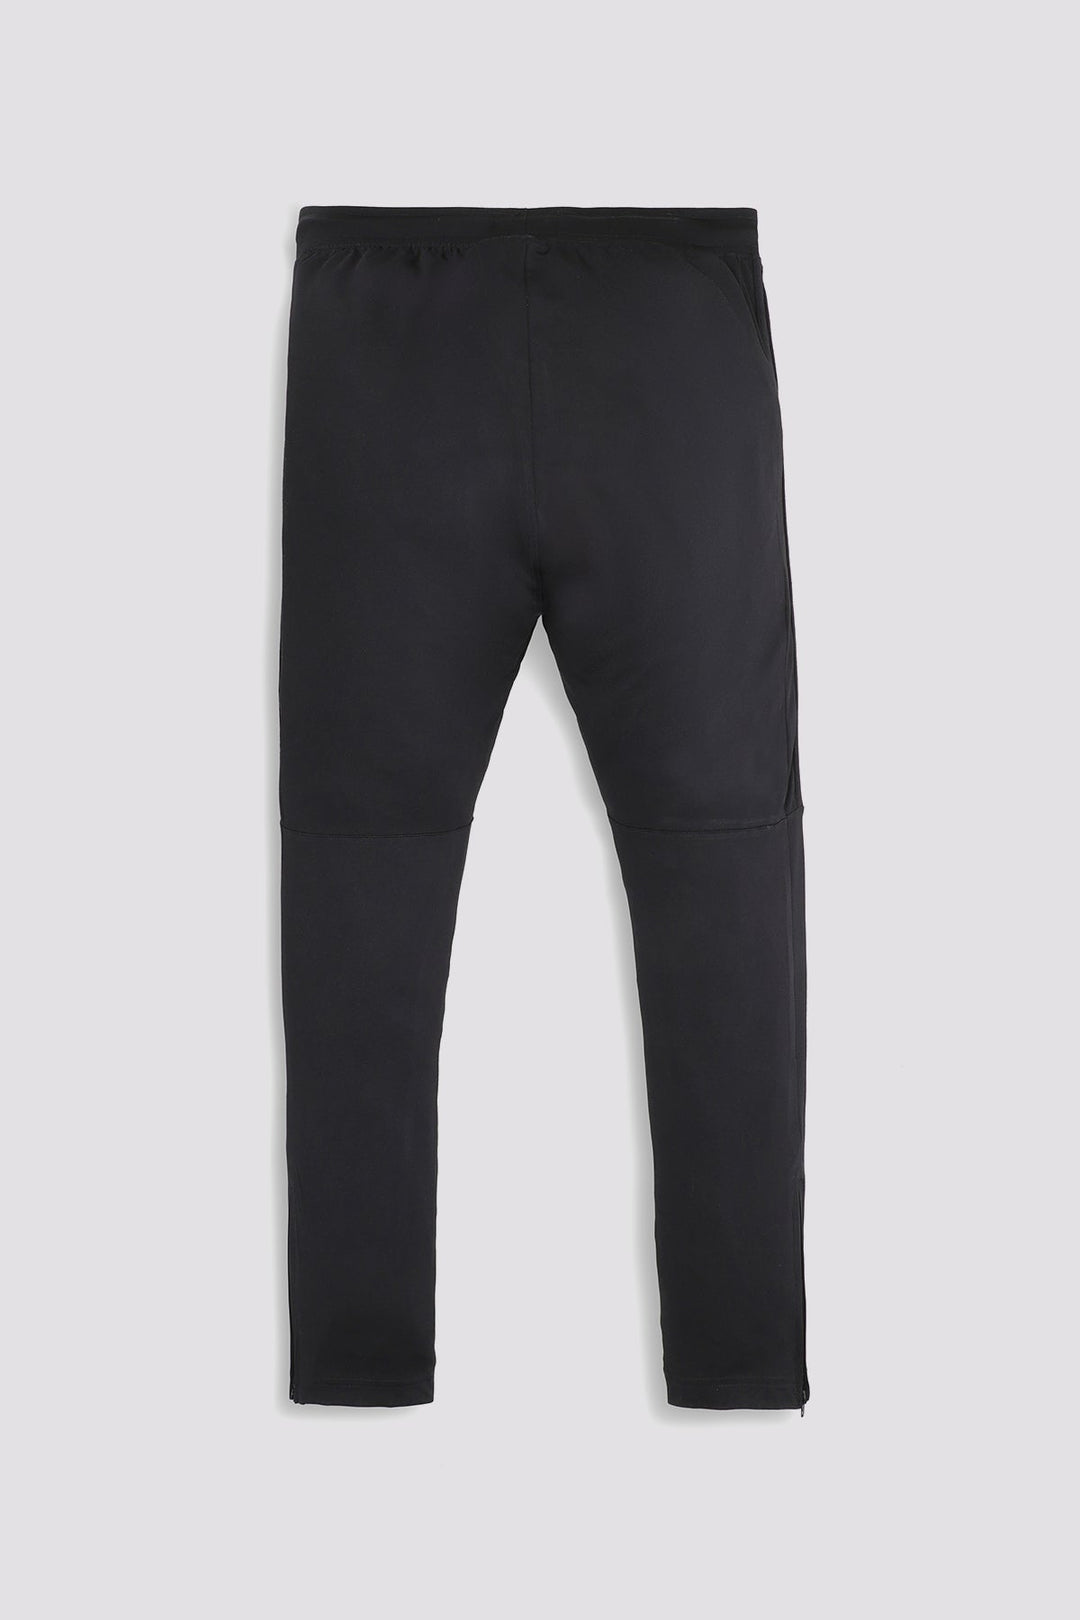 Go-Sporty Black Polyester Trousers (Plus Size) - W23 - MTR099P